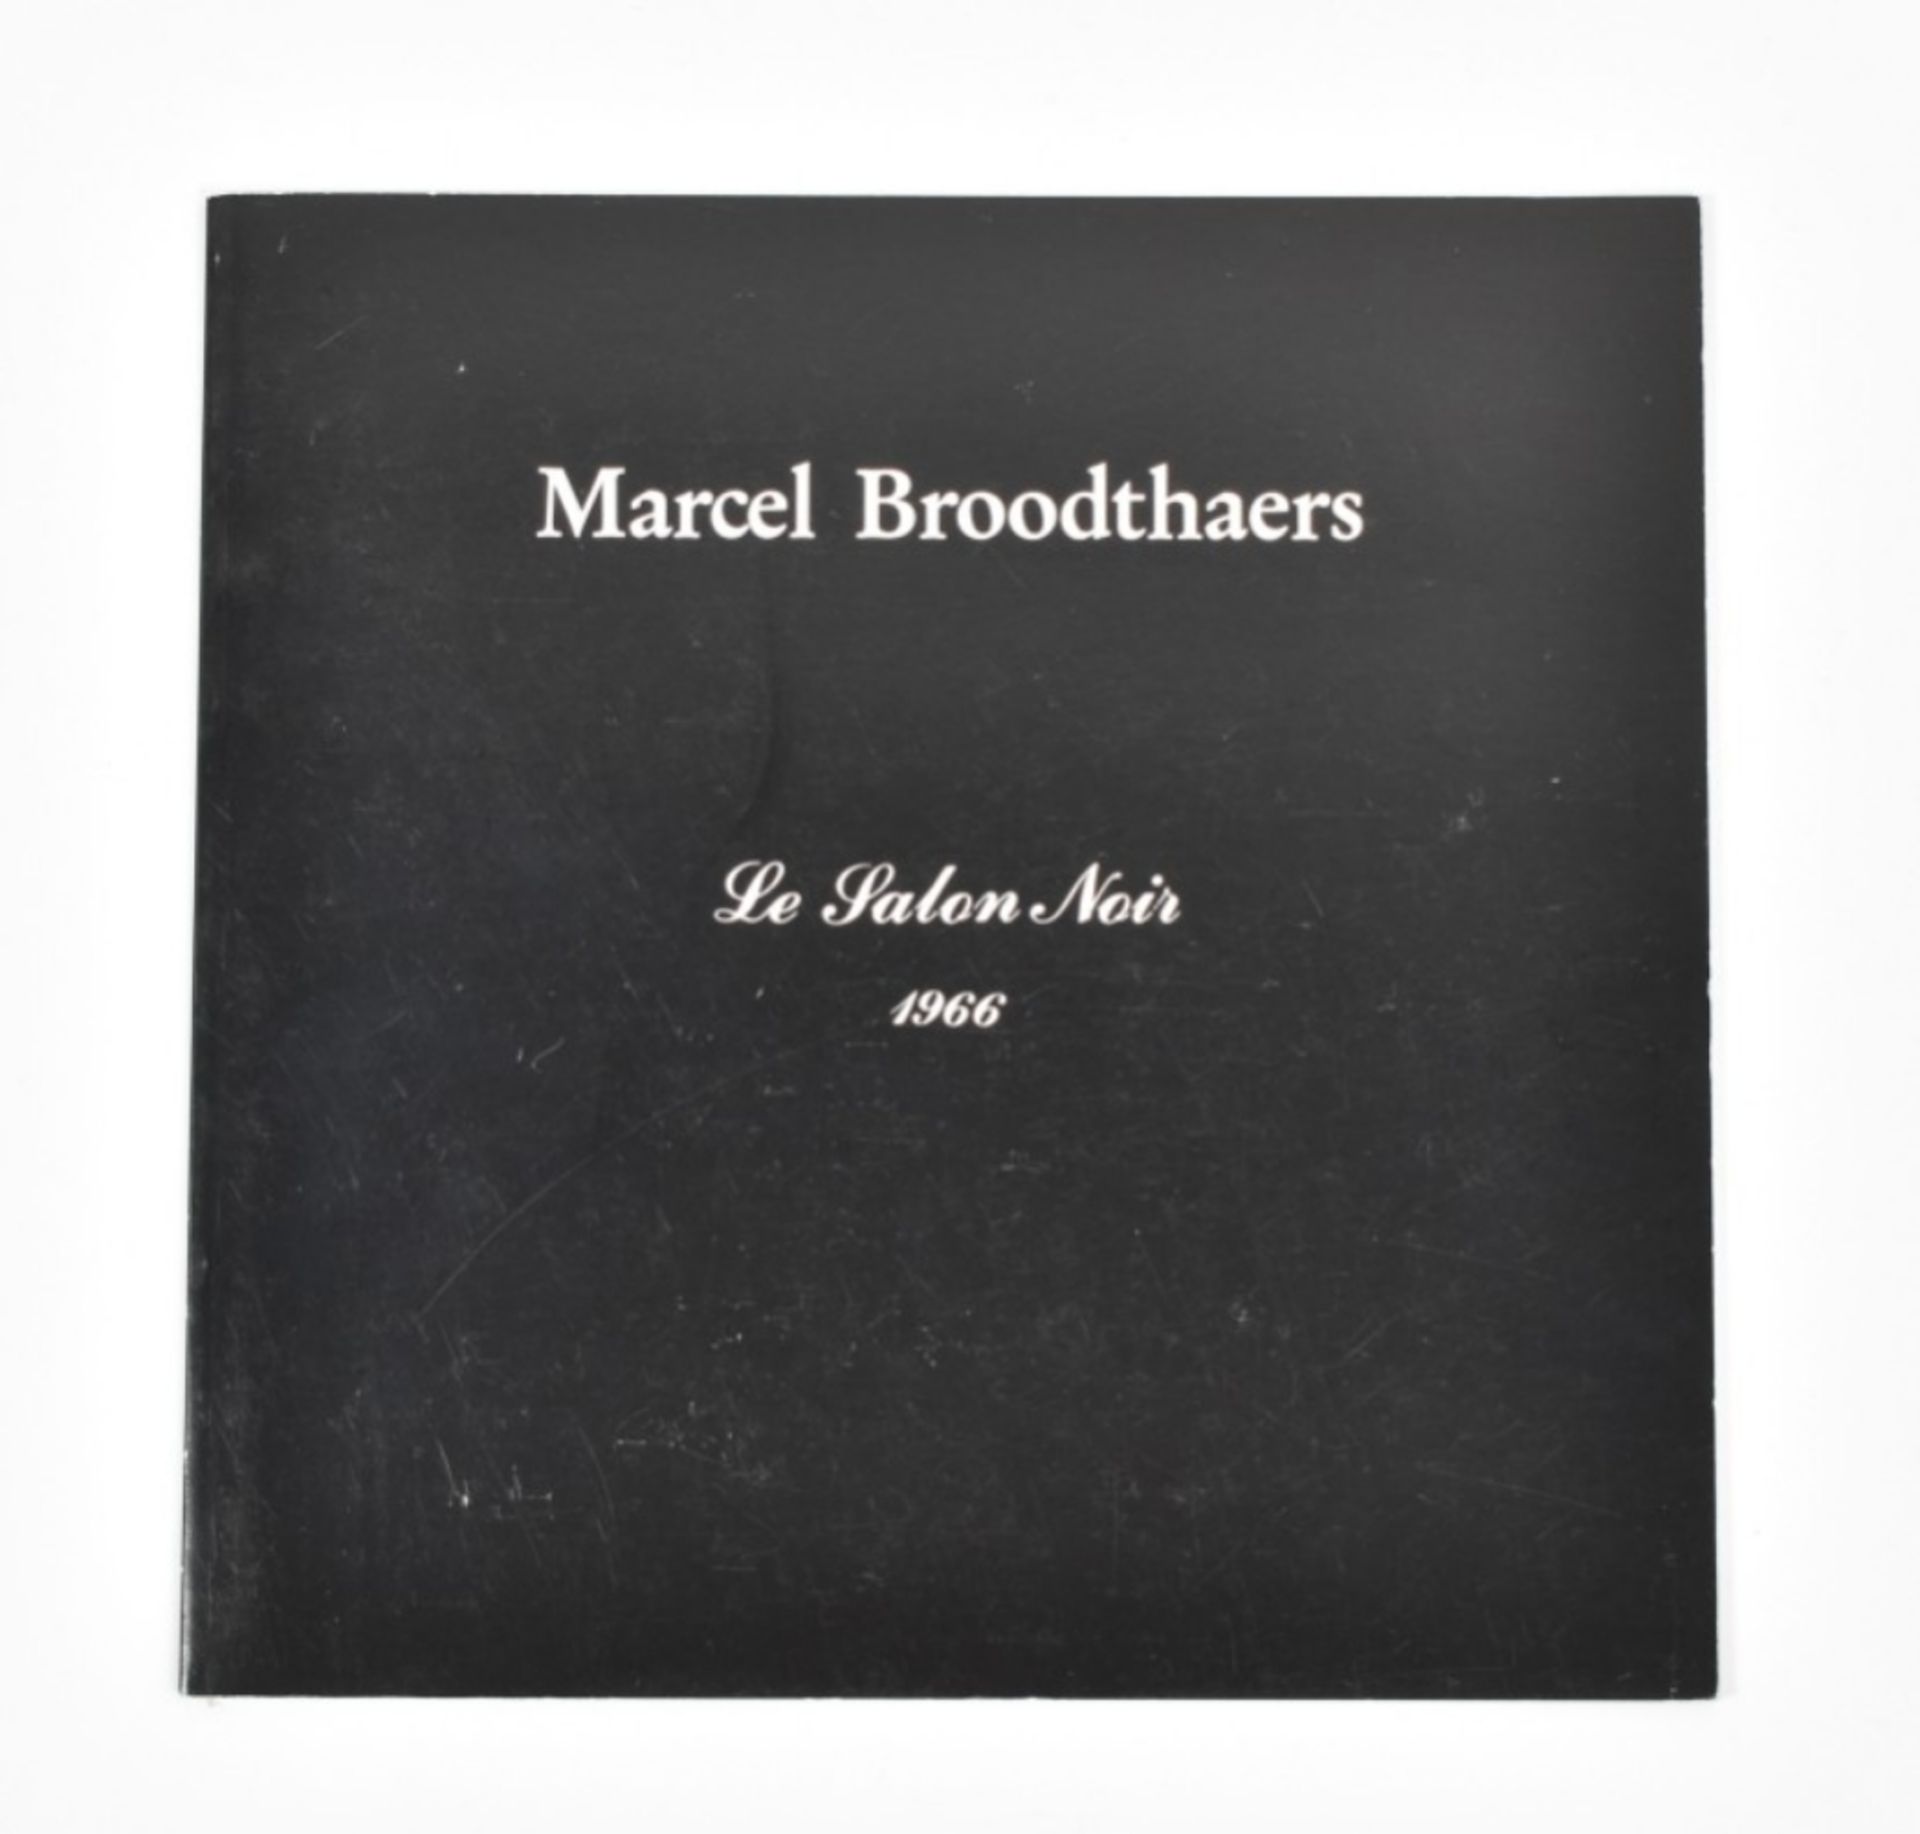 [s and 1970s] Marcel Broodthaers - Image 5 of 6